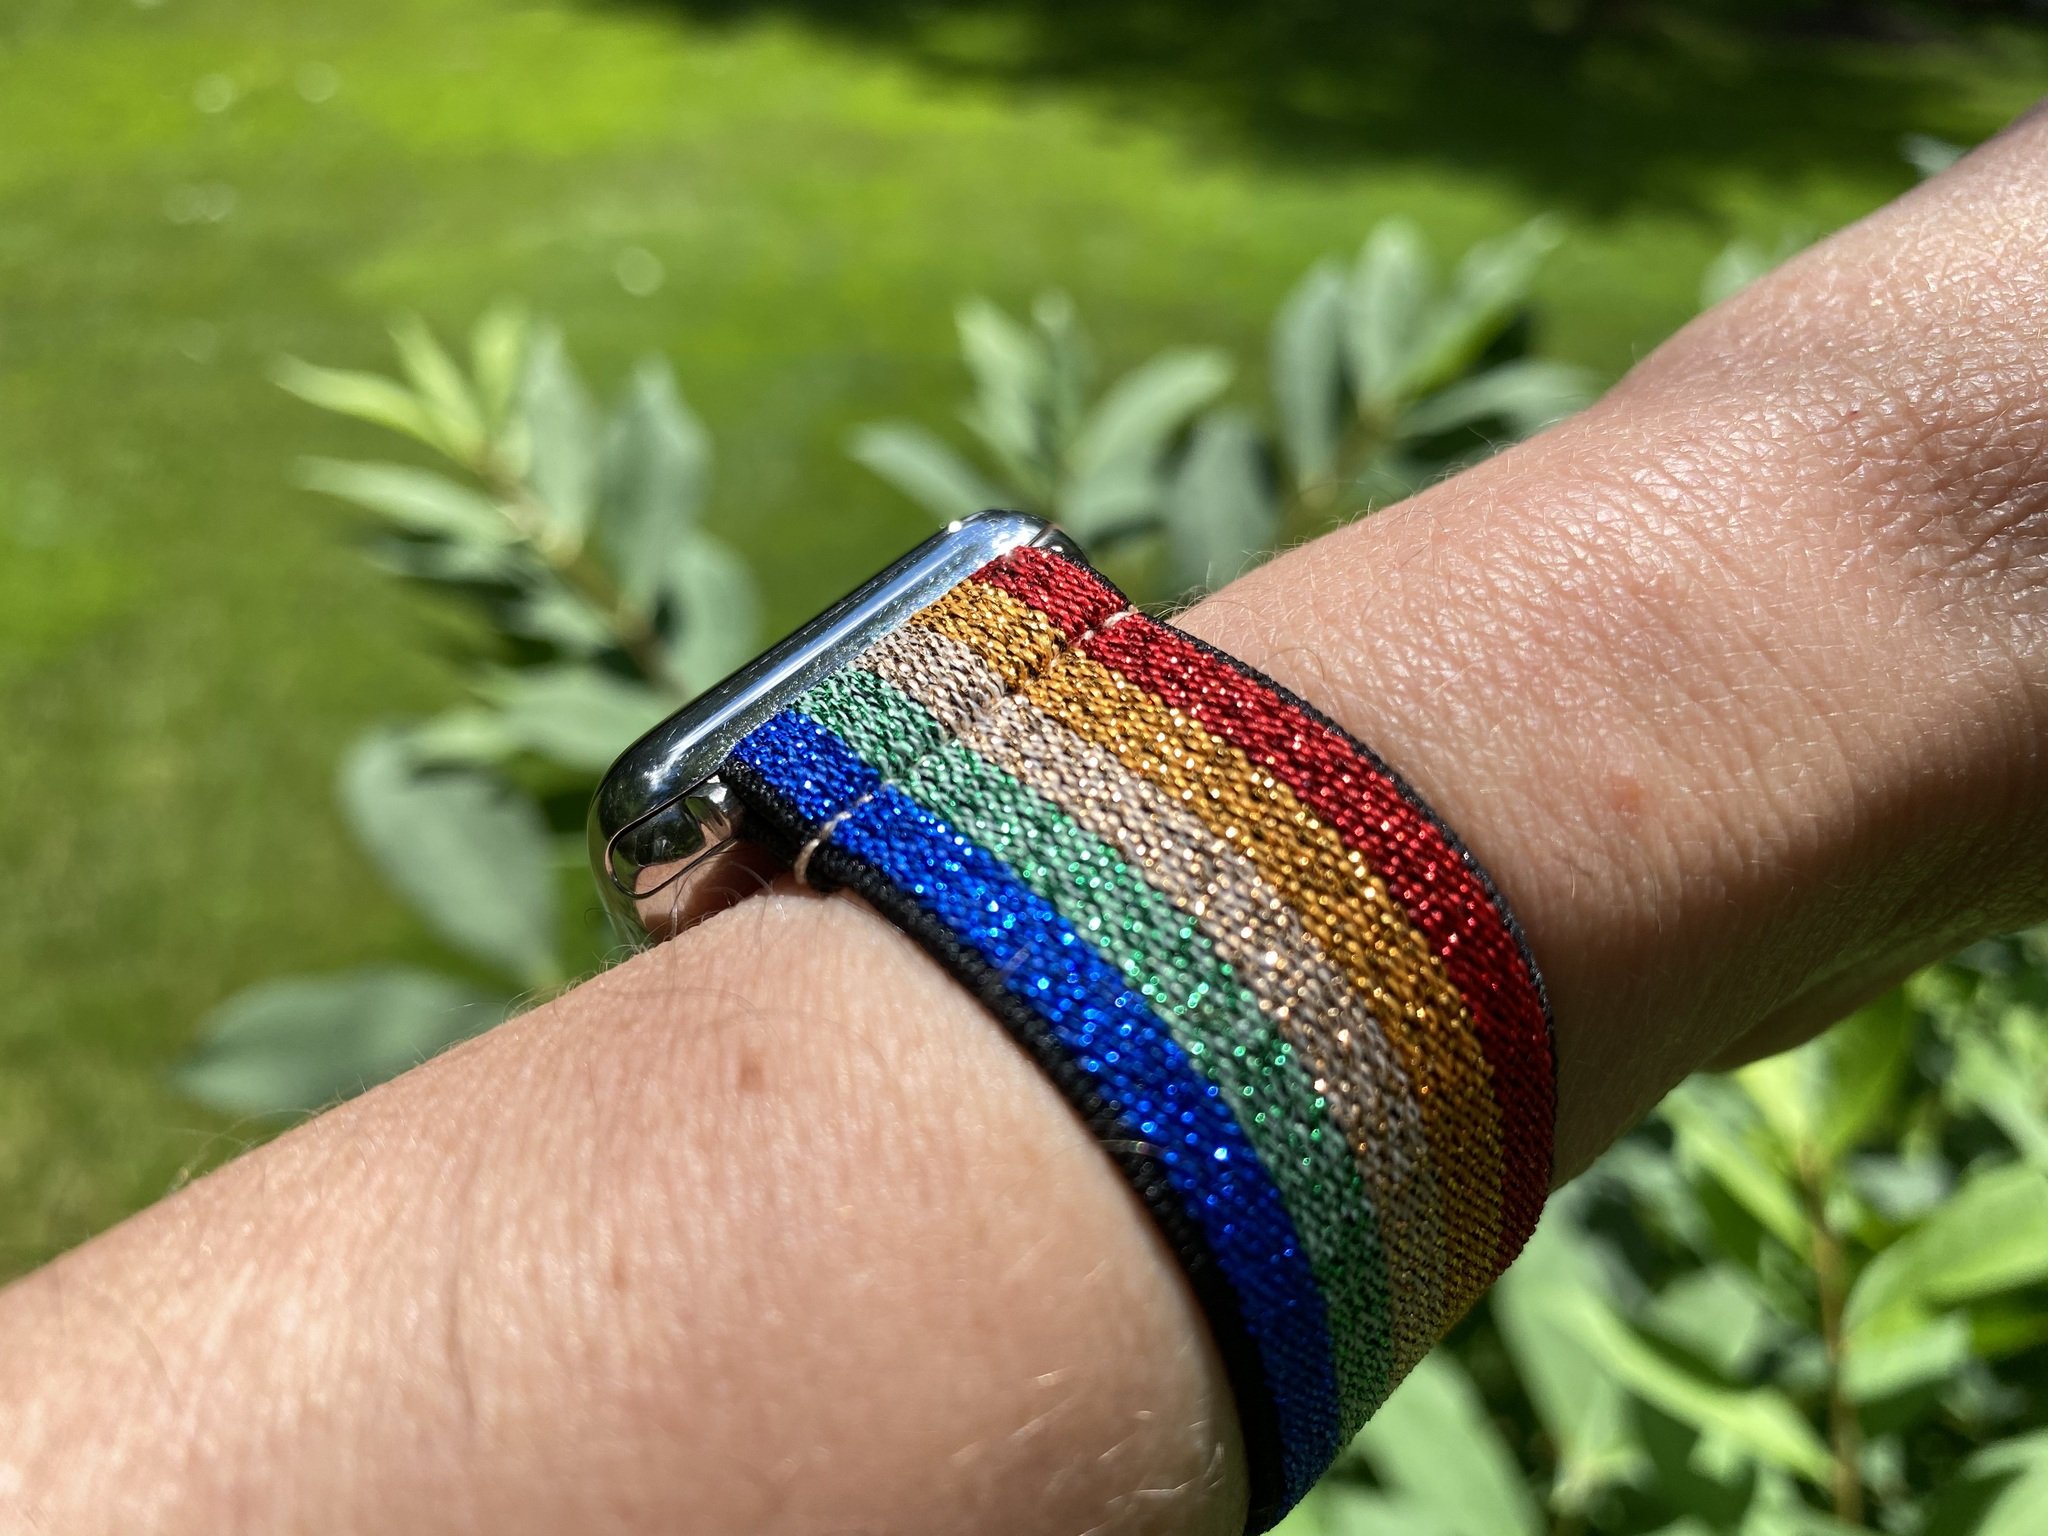 TOYOUTHS Elastic Apple Watch Band review: Sparkly rainbows and 